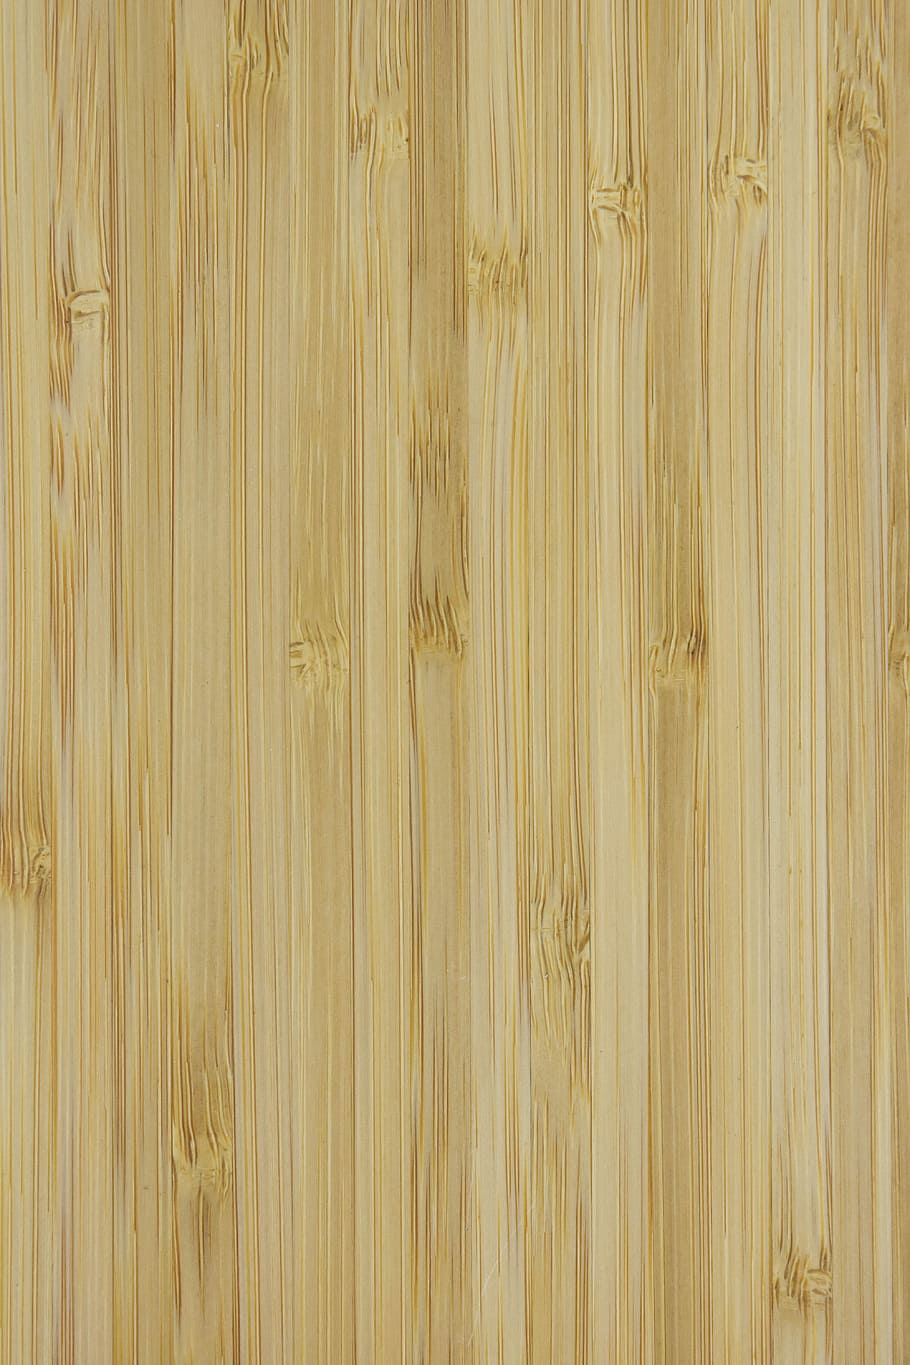 the background, wood, wooden, retro, texture, boards, pattern, the structure of the, background, wallpaper